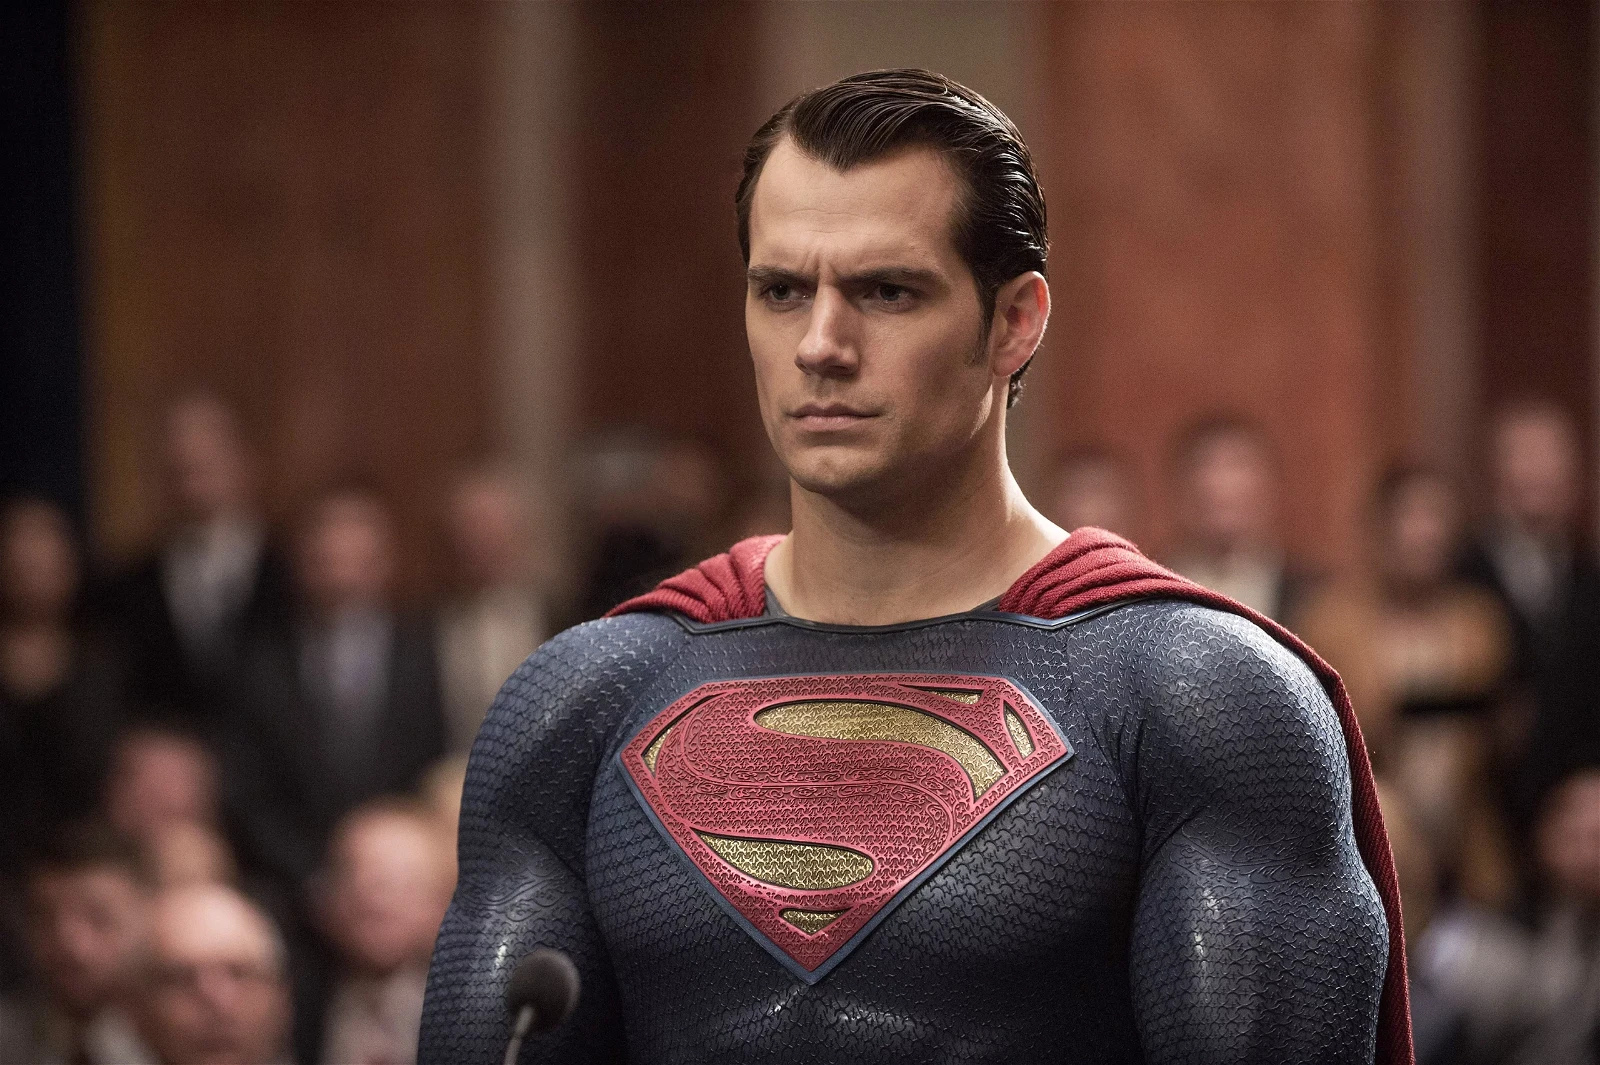 Henry Cavill as Superman in the DCU.